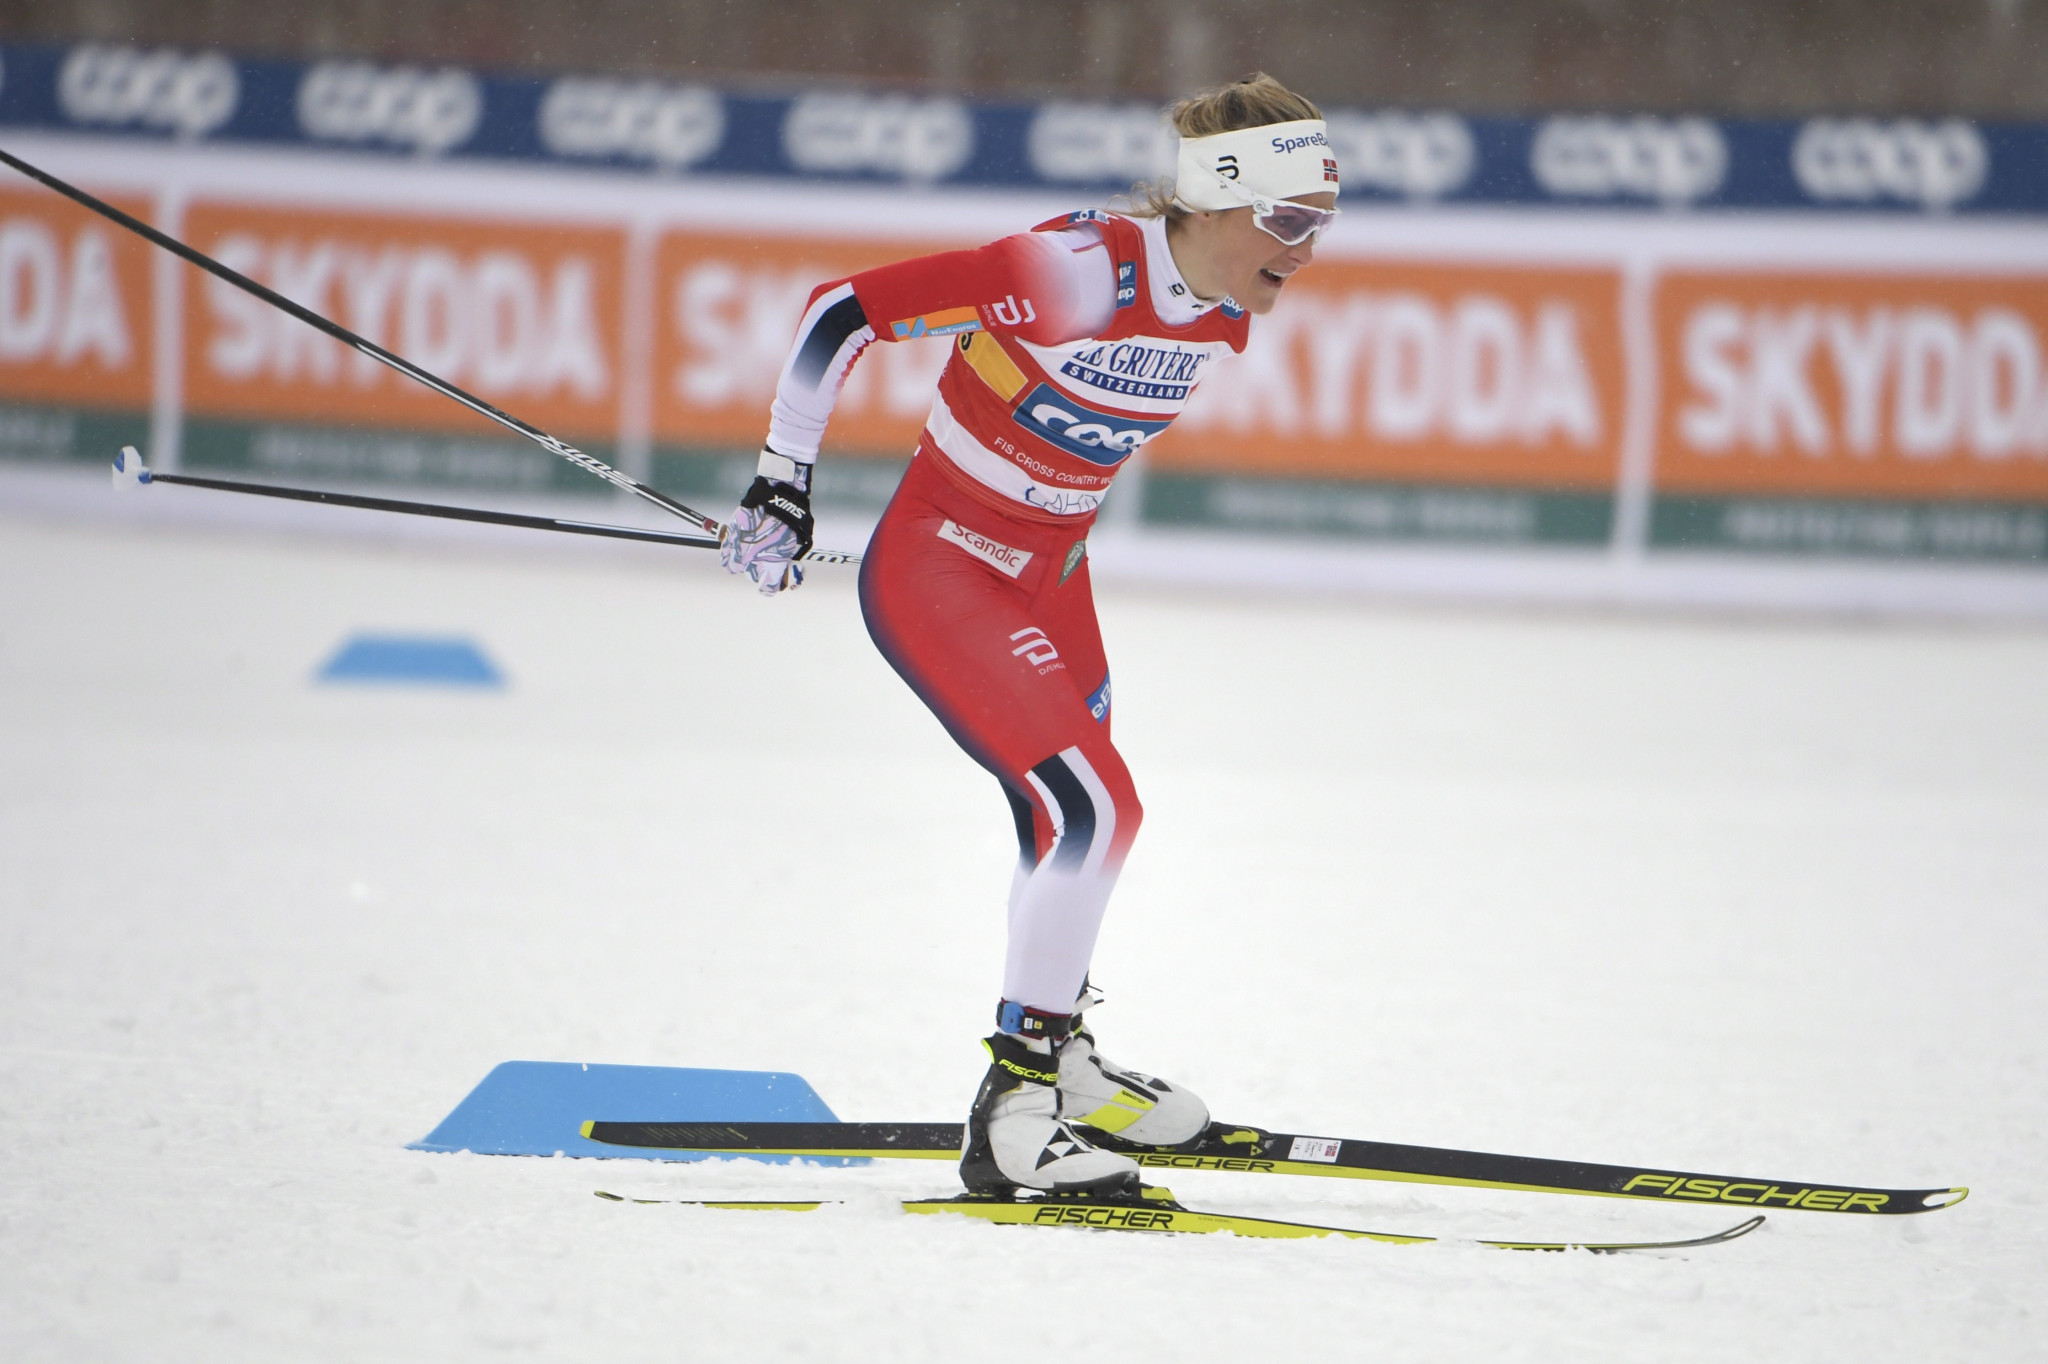 Johaug looking to clinch overall title at home FIS Cross-Country World Cup event in Oslo 